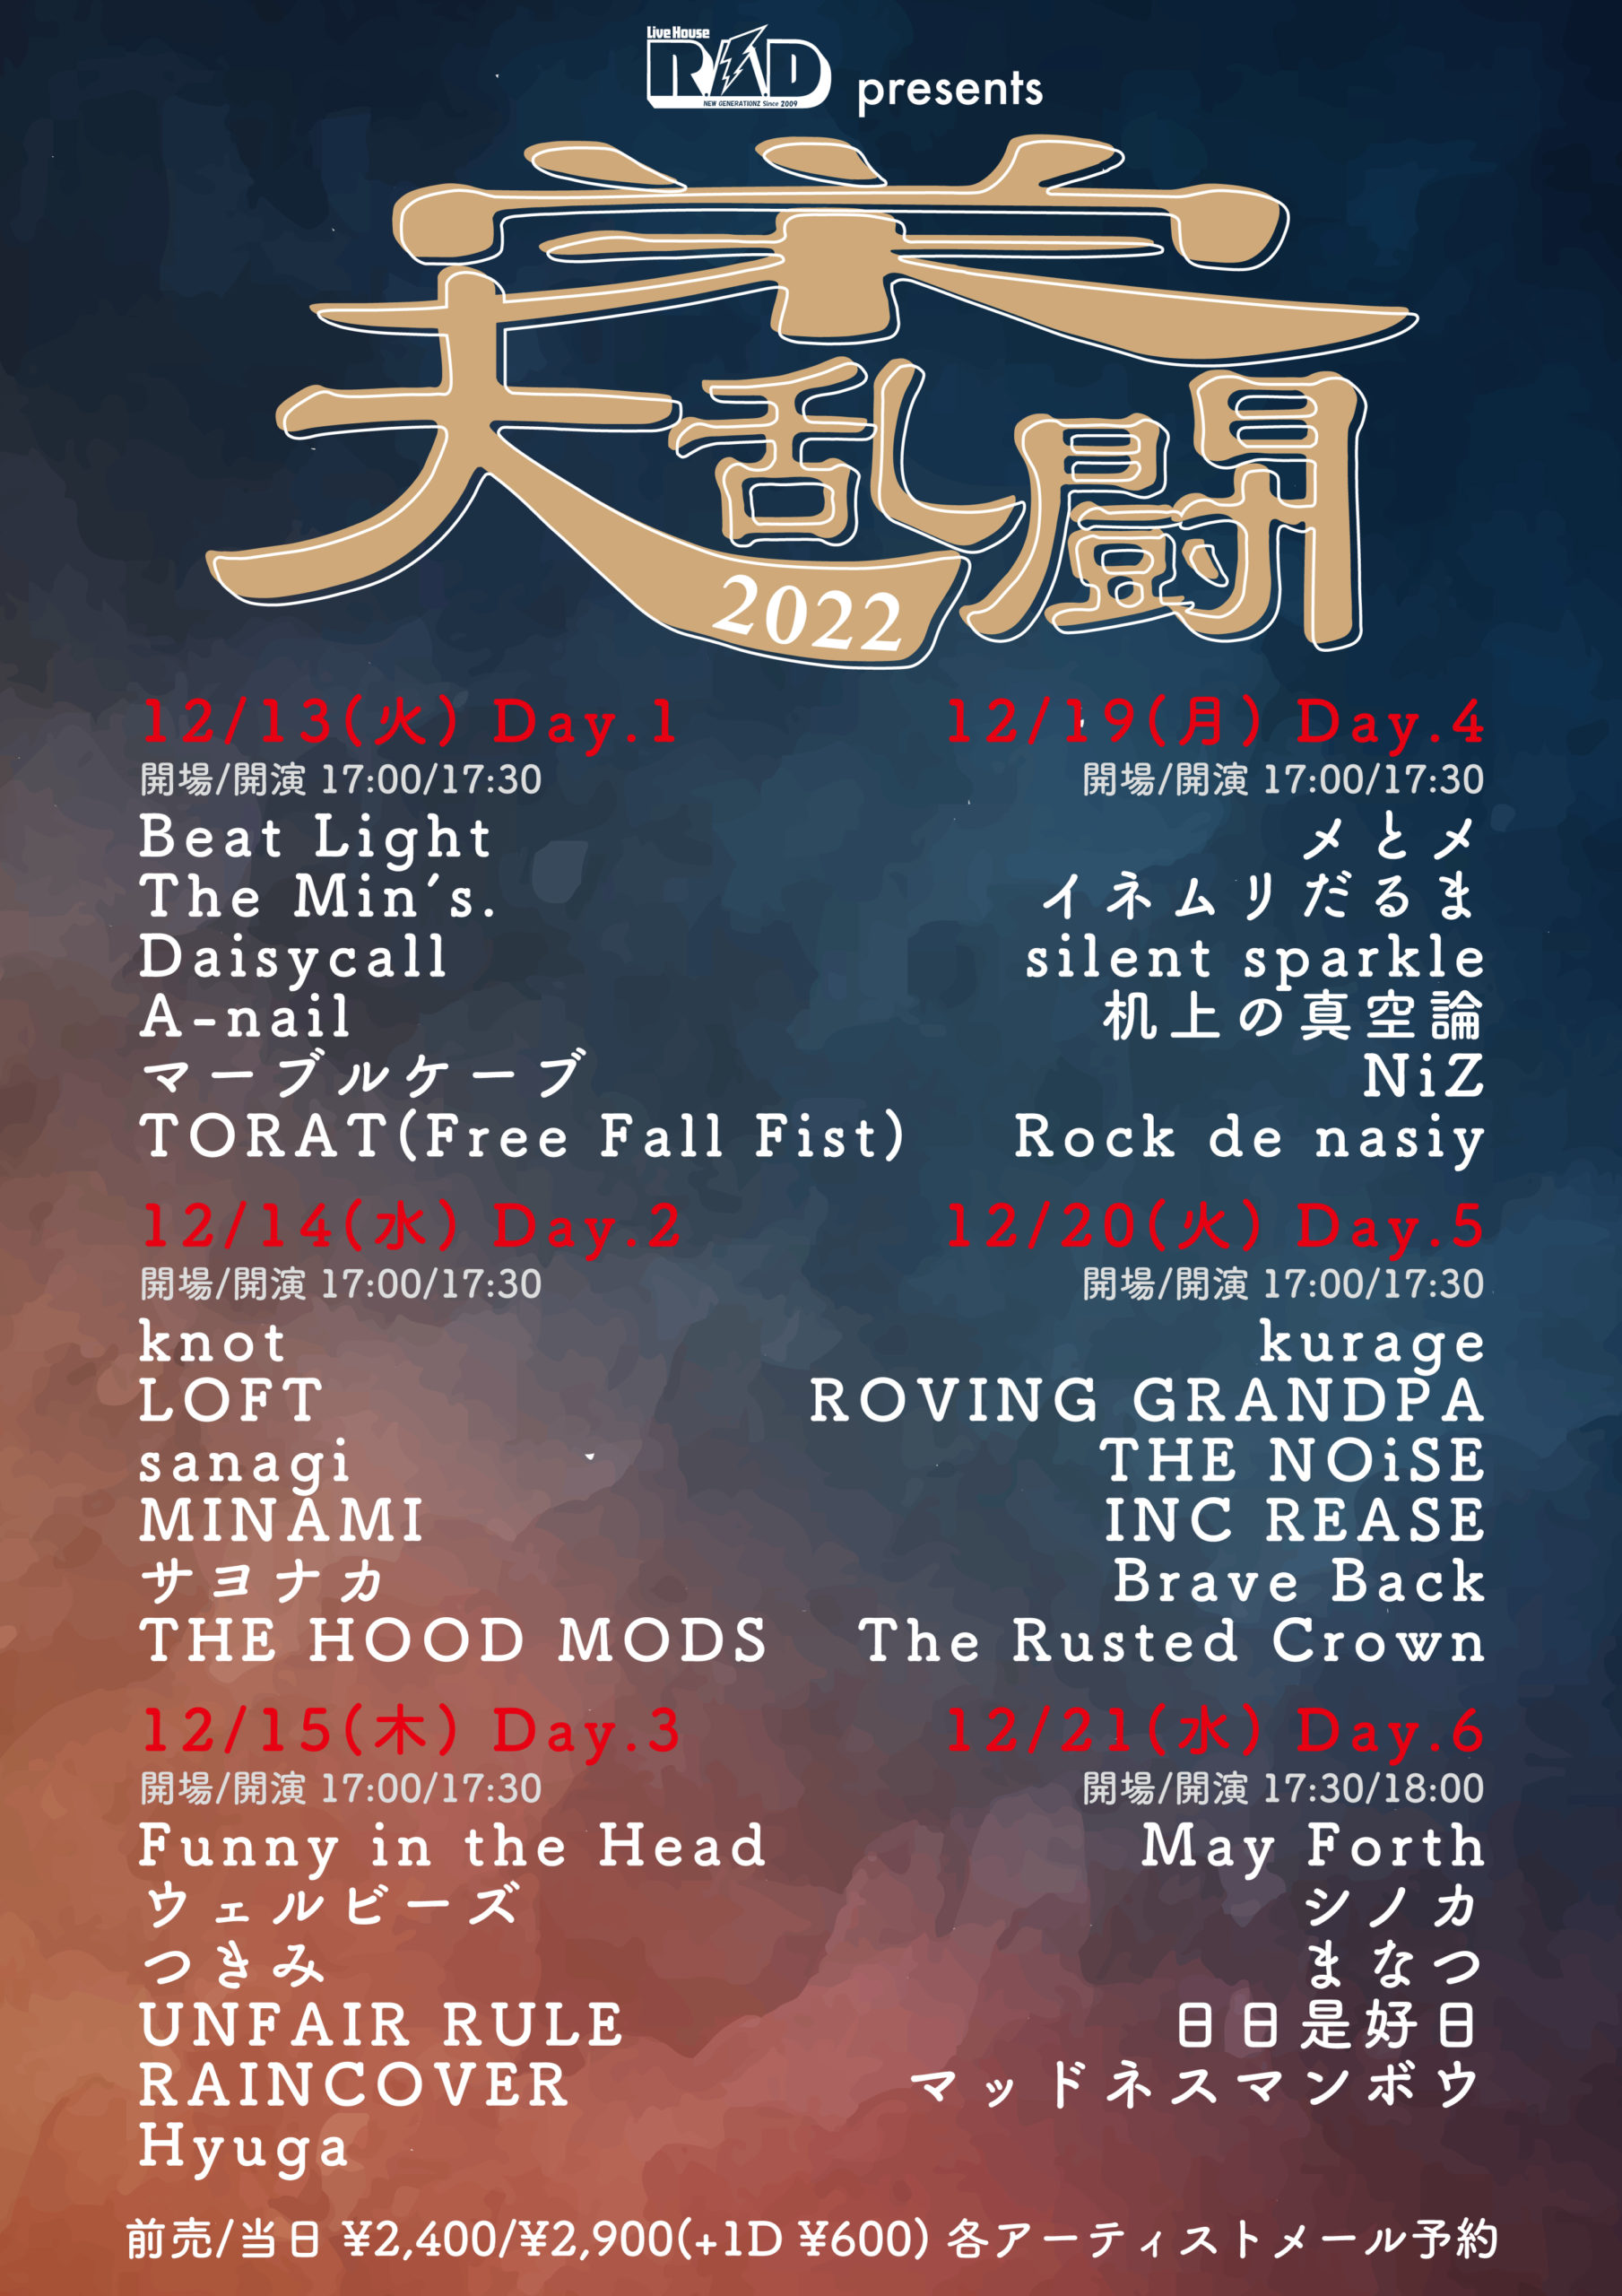 R.A.D presents 栄大乱闘2022 Day.5